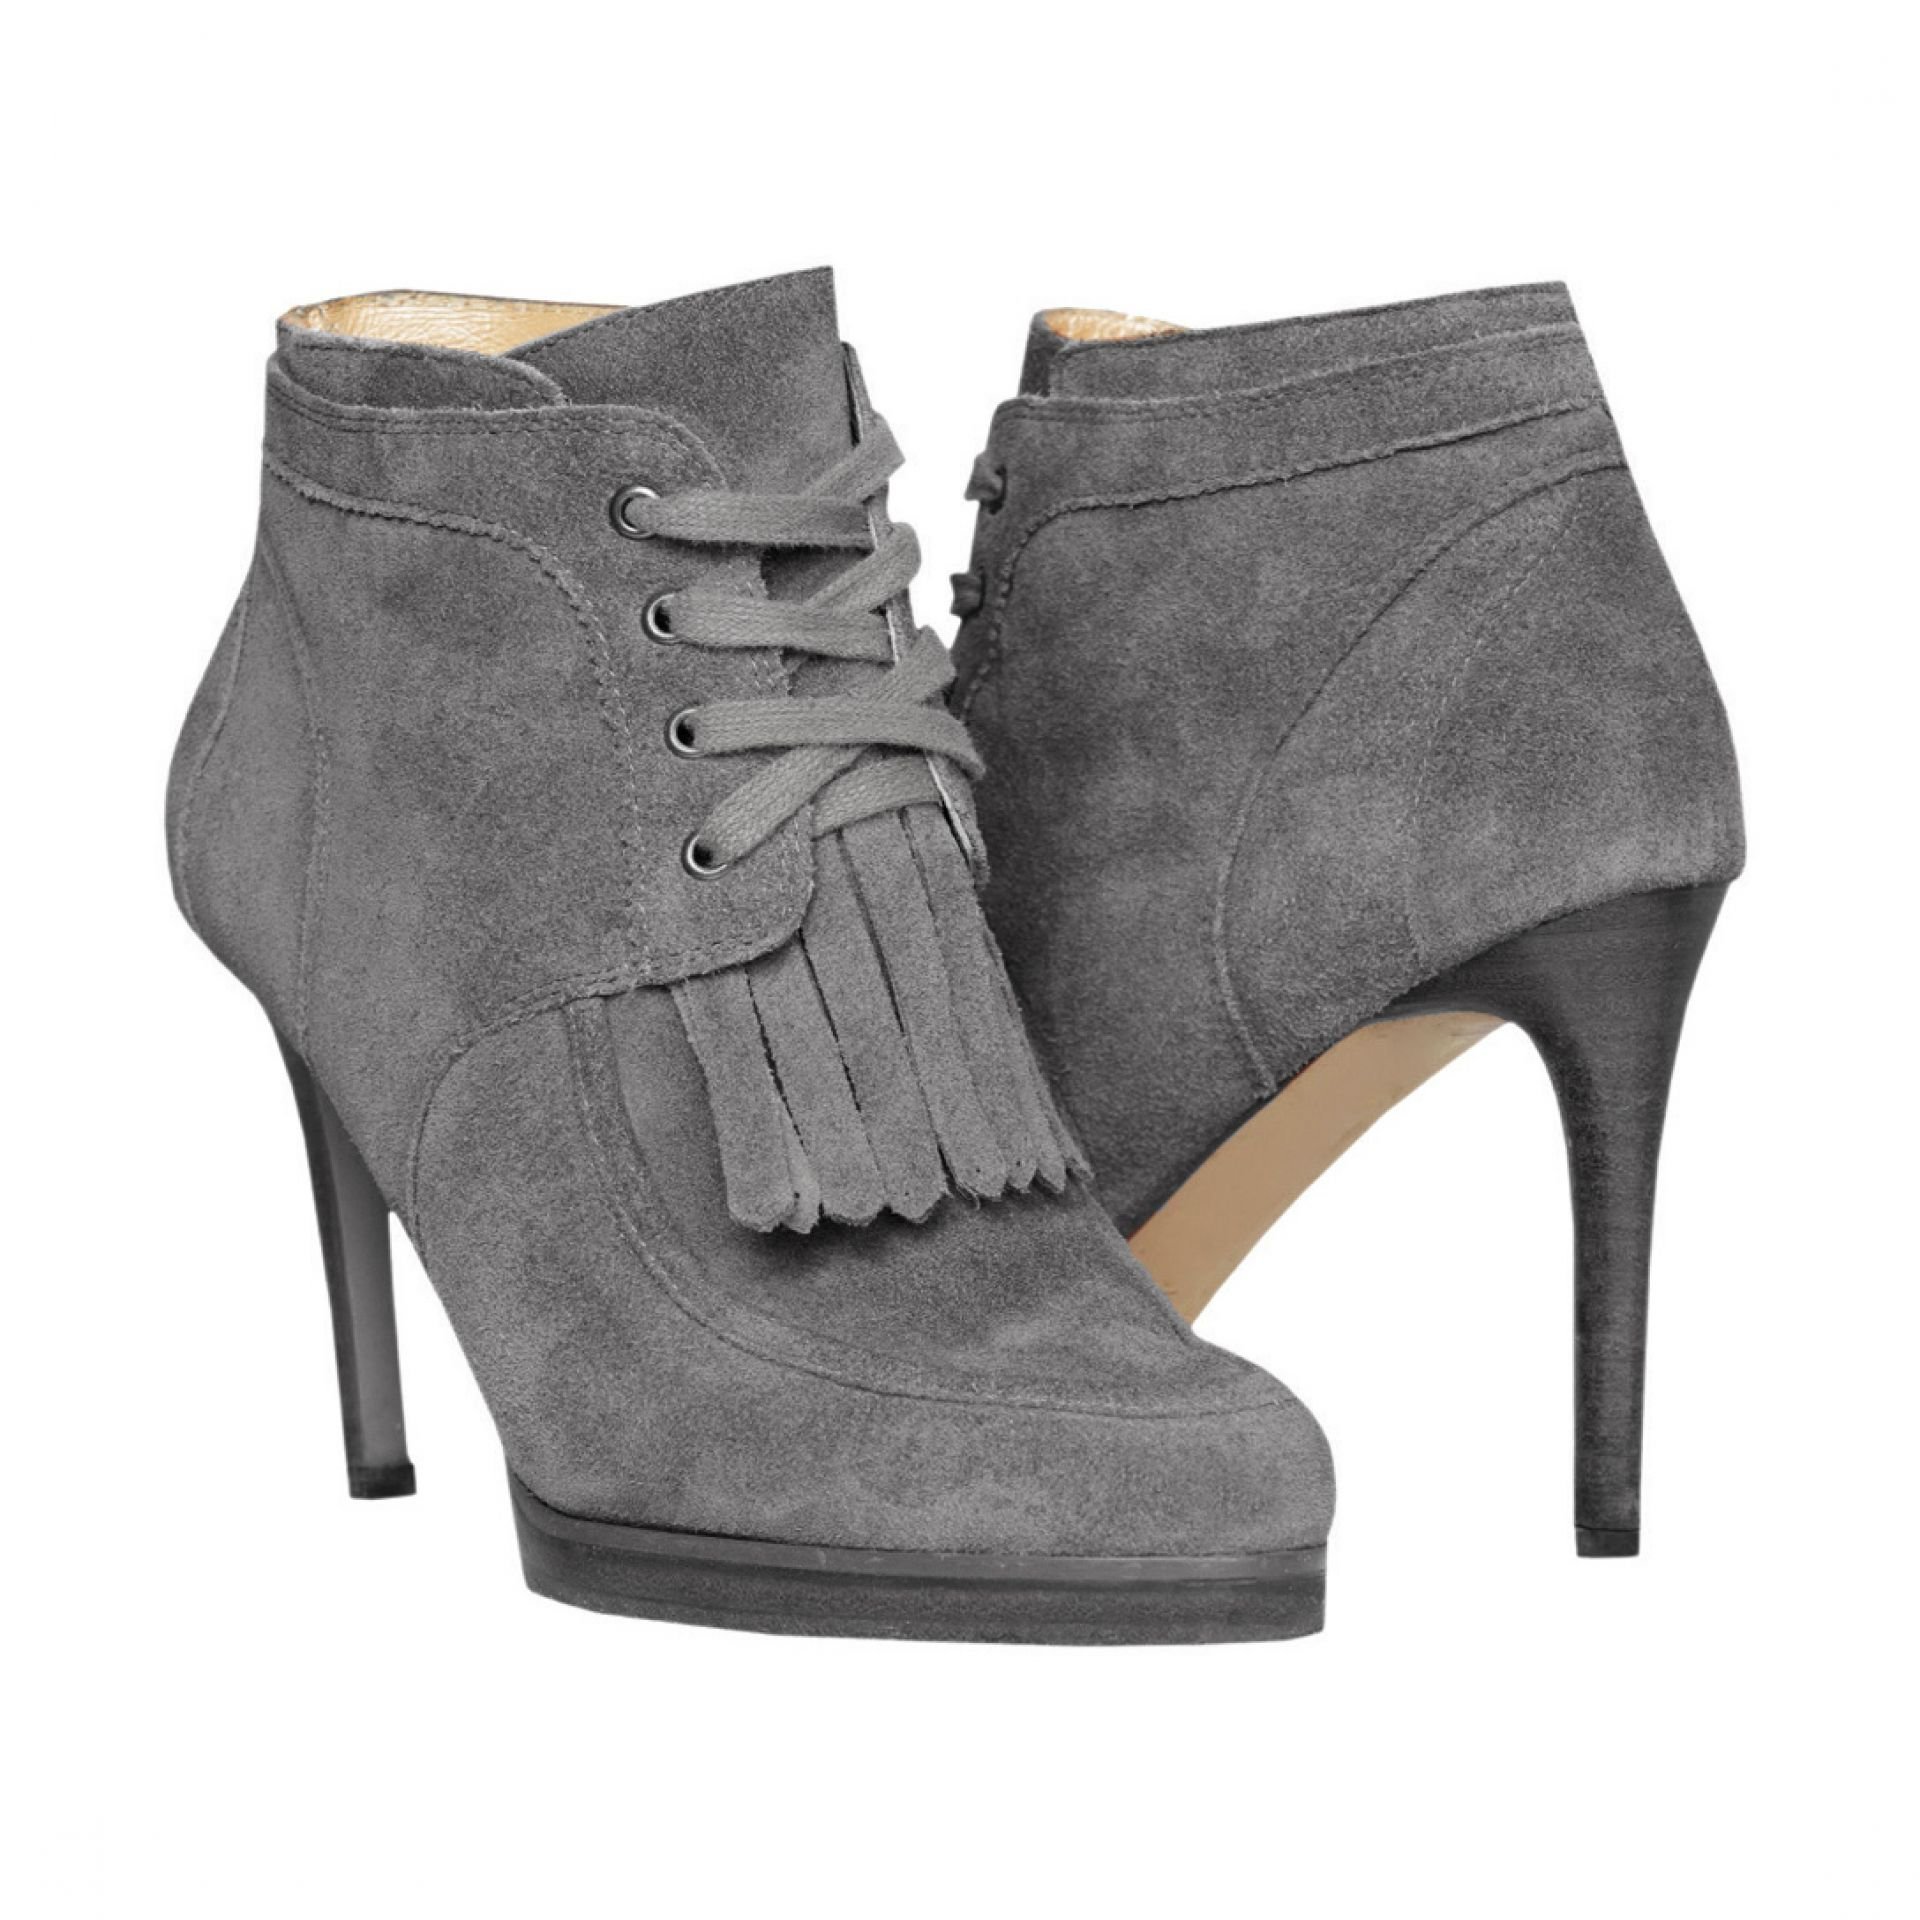 Leather high heeled ankle boots